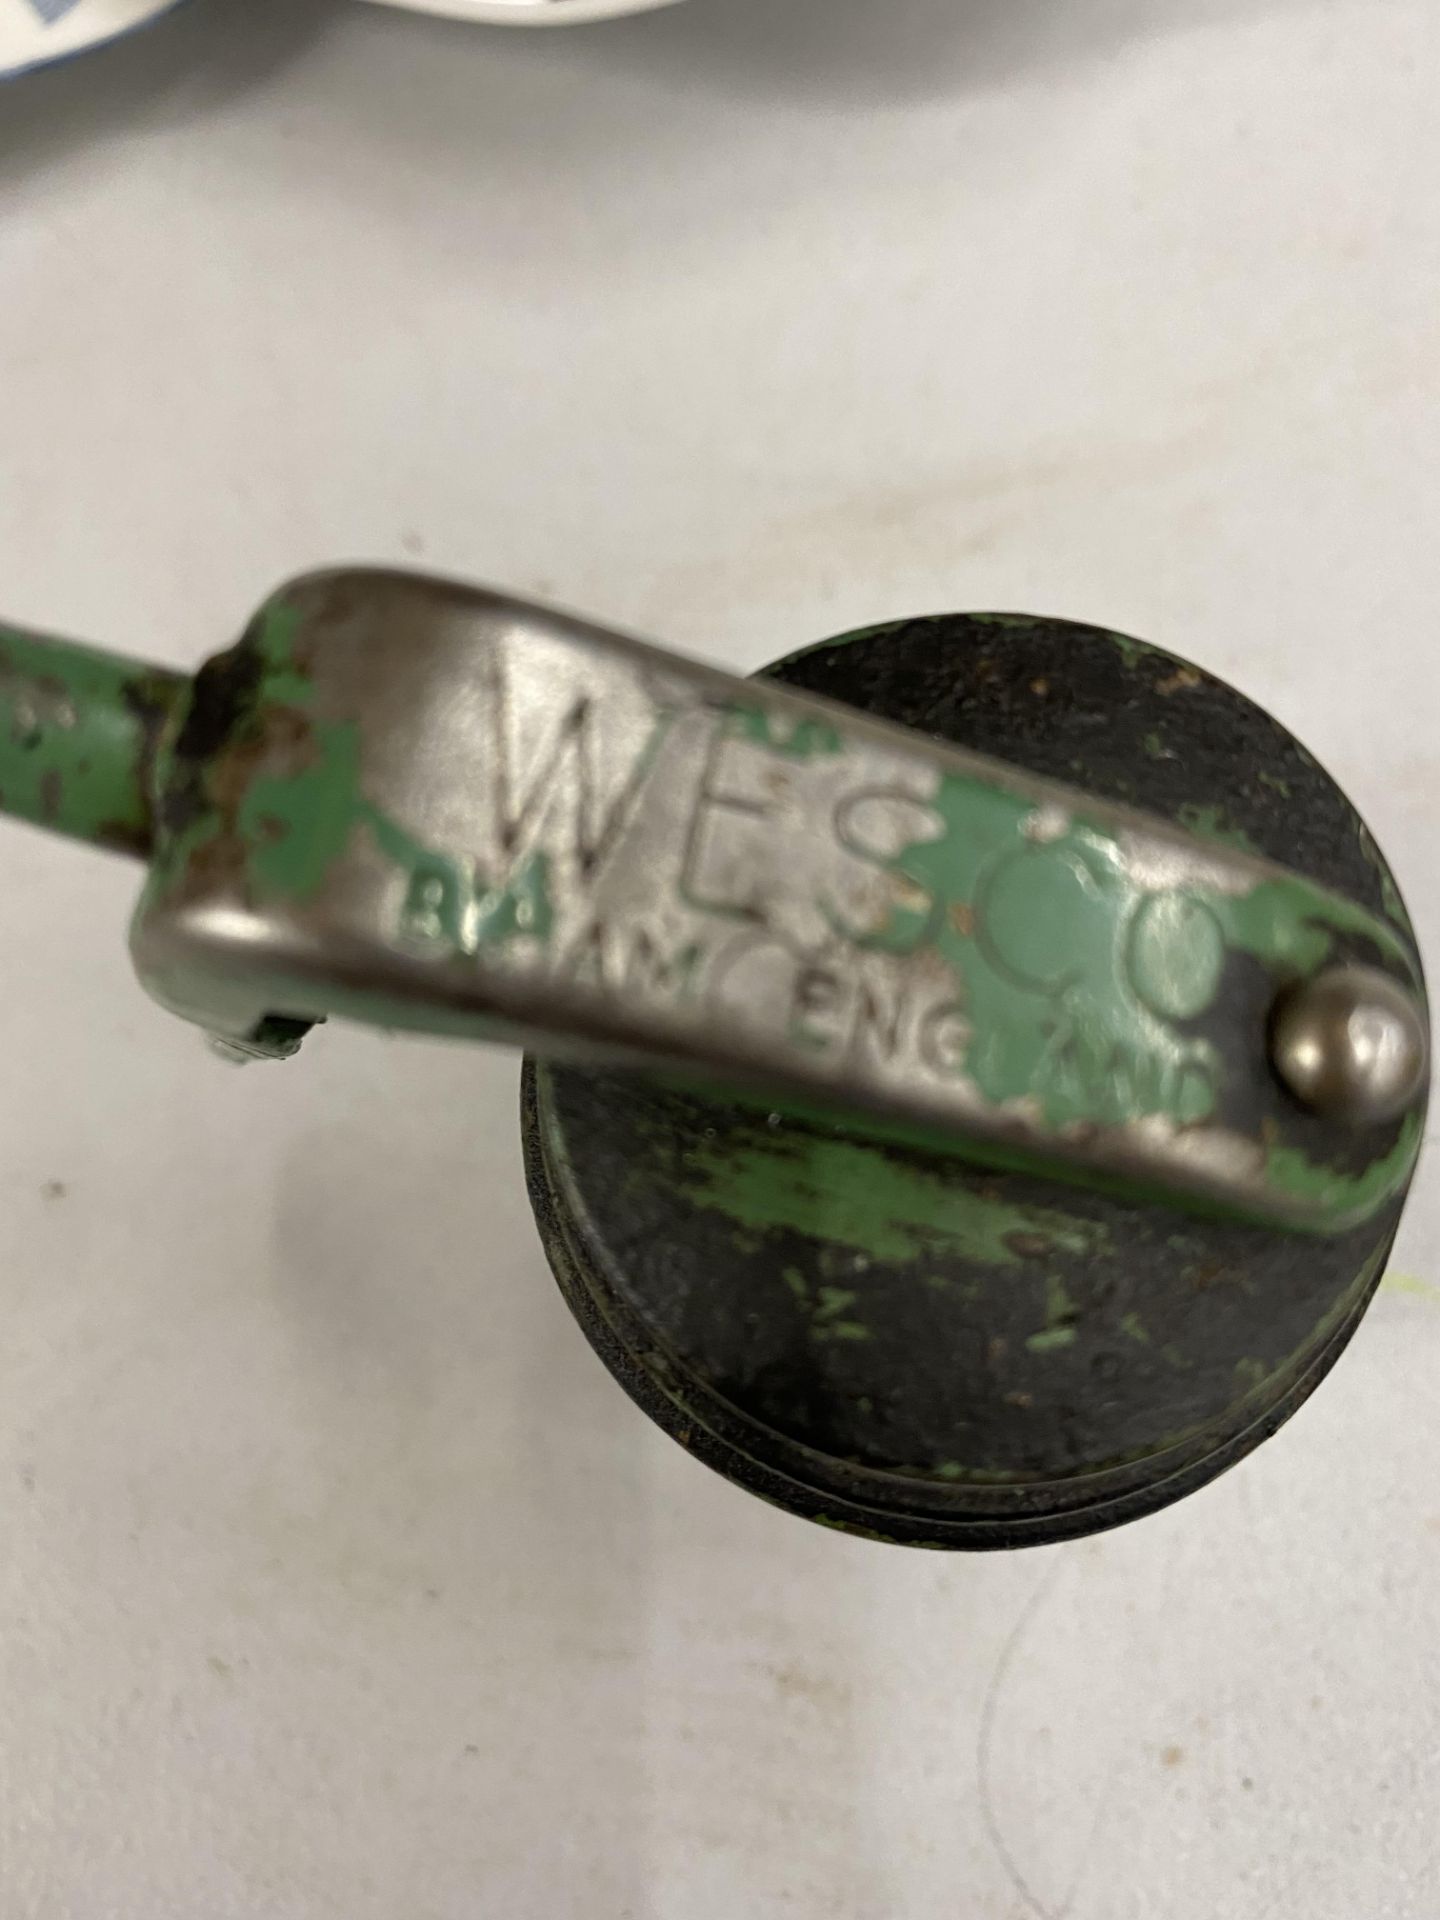 A VINTAGE WESTCO OIL CAN - Image 8 of 8